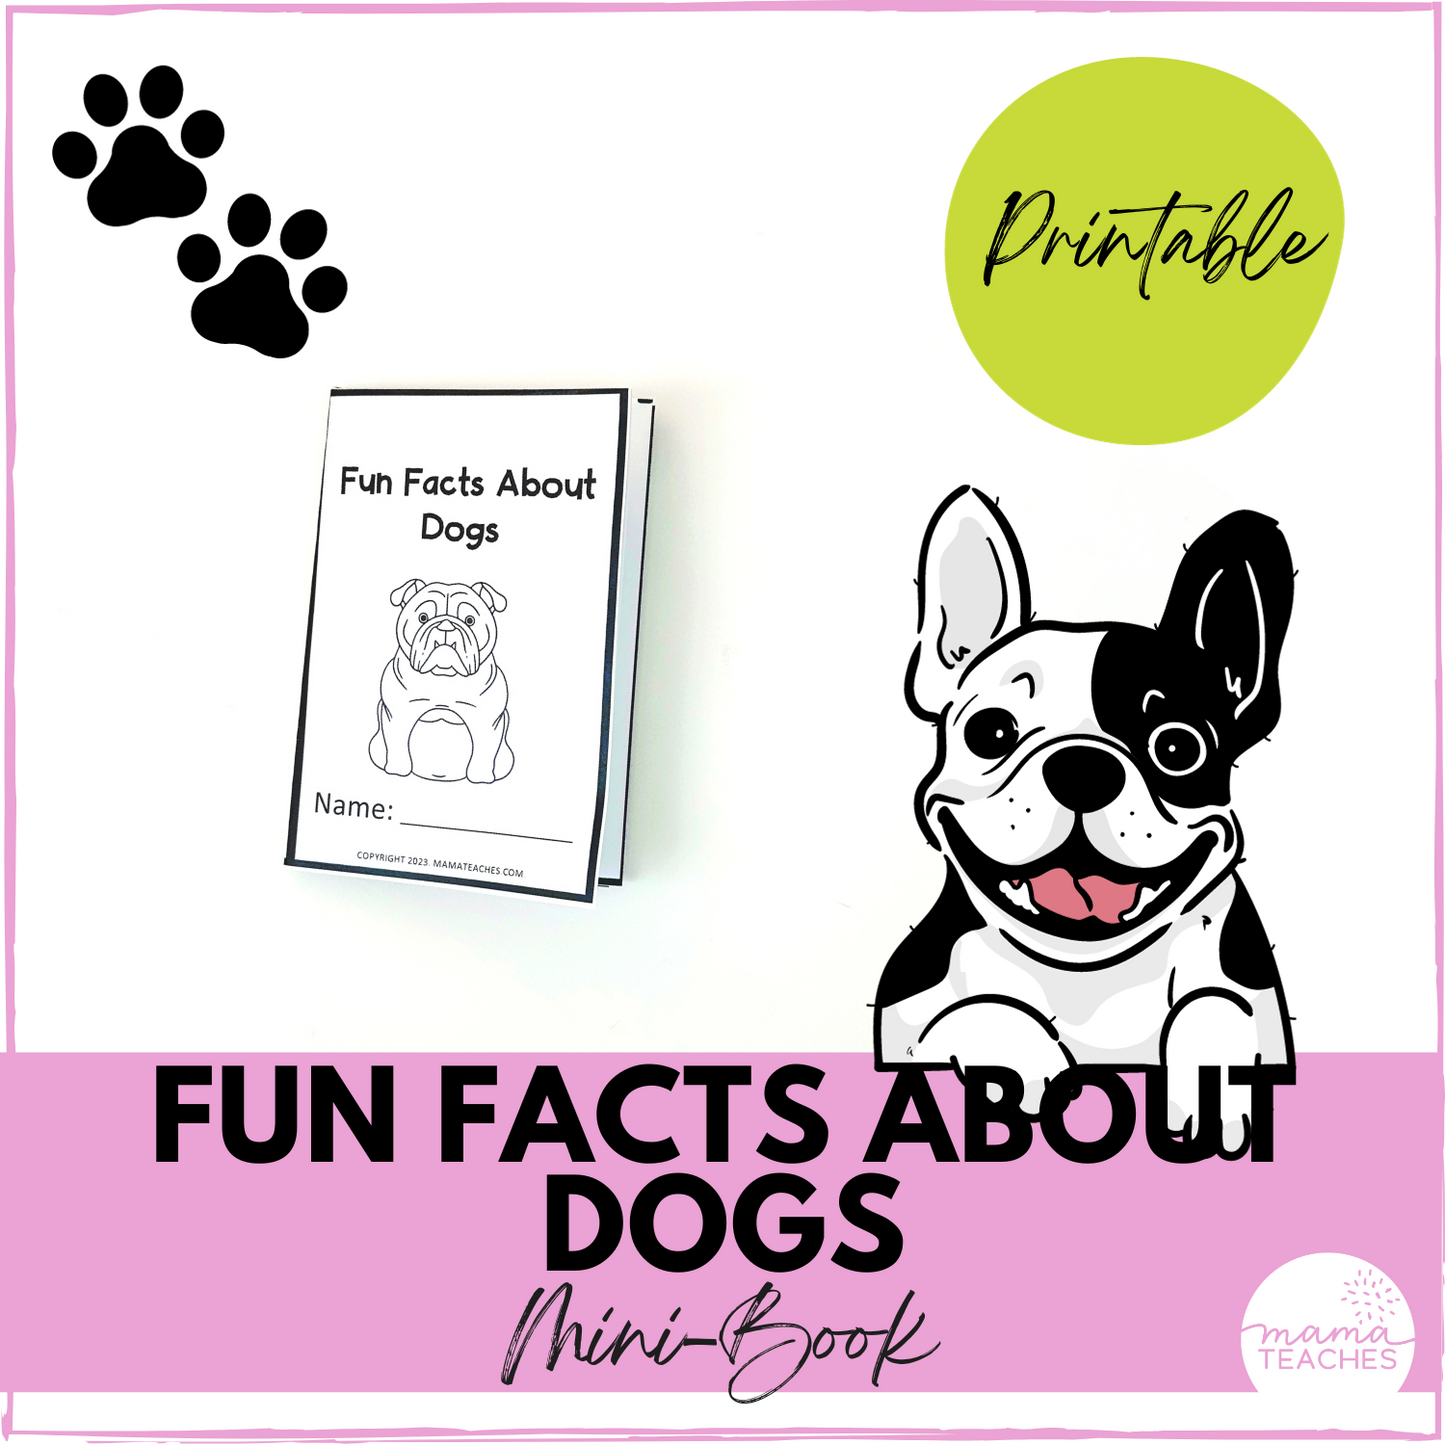 Fun Facts About Dogs Mini-Book